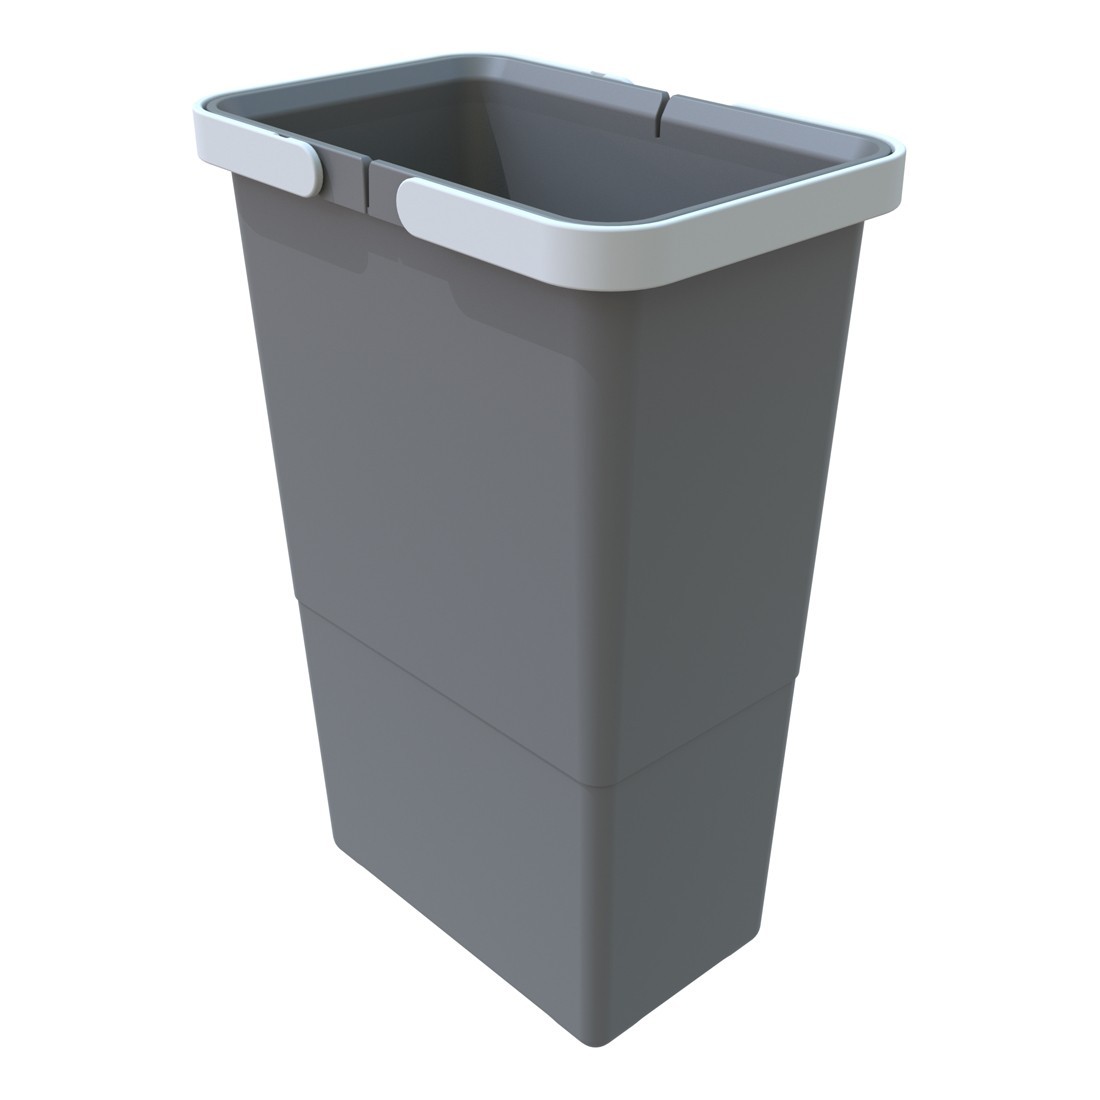 Dustbin(Dust Box) for Lefant M1 (compatible with U180/OKP-K8